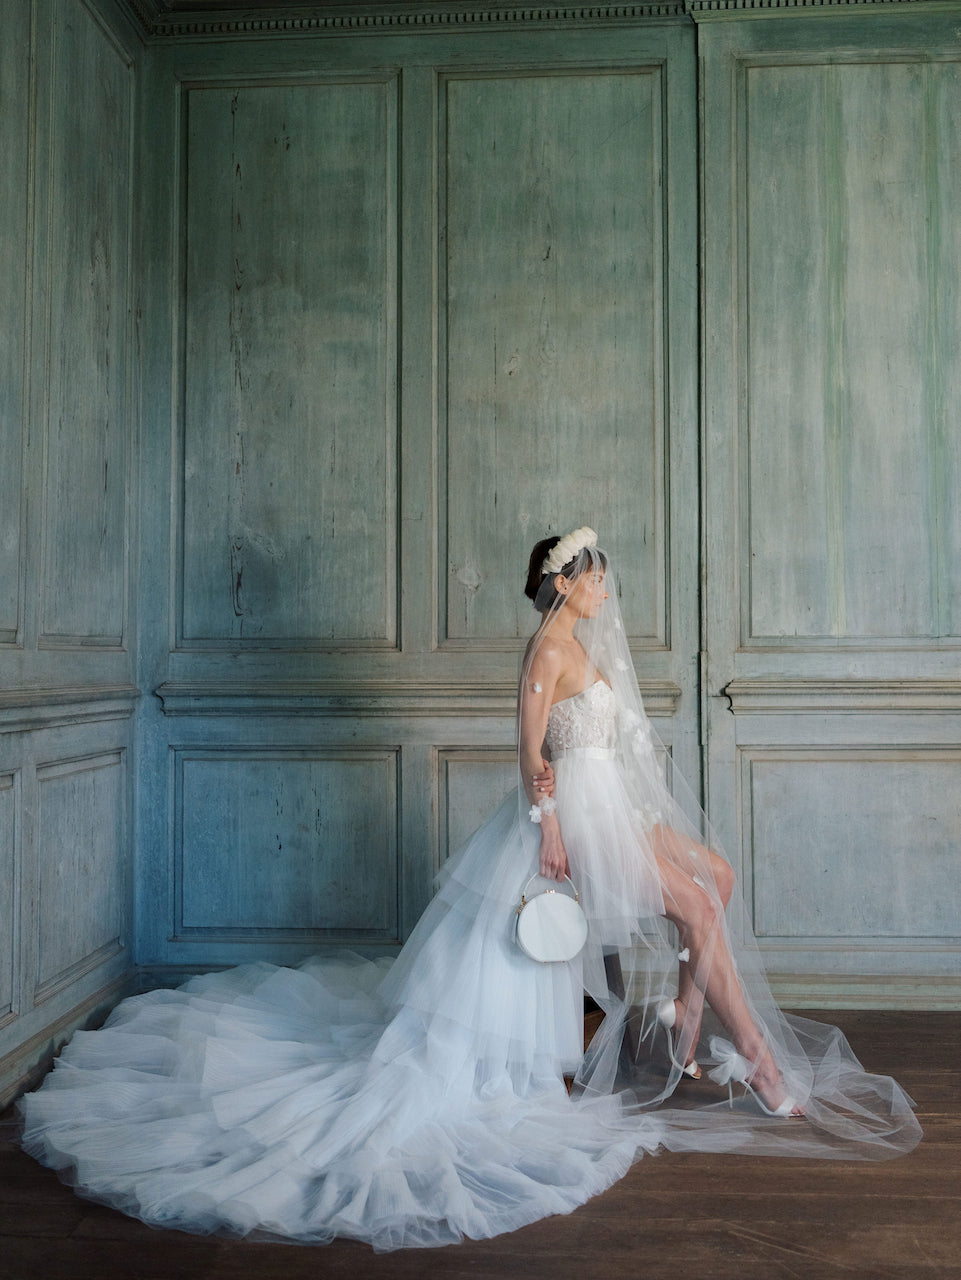 A vintage-inspired bride in a white wedding dress sitting on a wooden floor with The Bella Rosa Collection&#39;s &quot;The Original Hat Box&quot;.